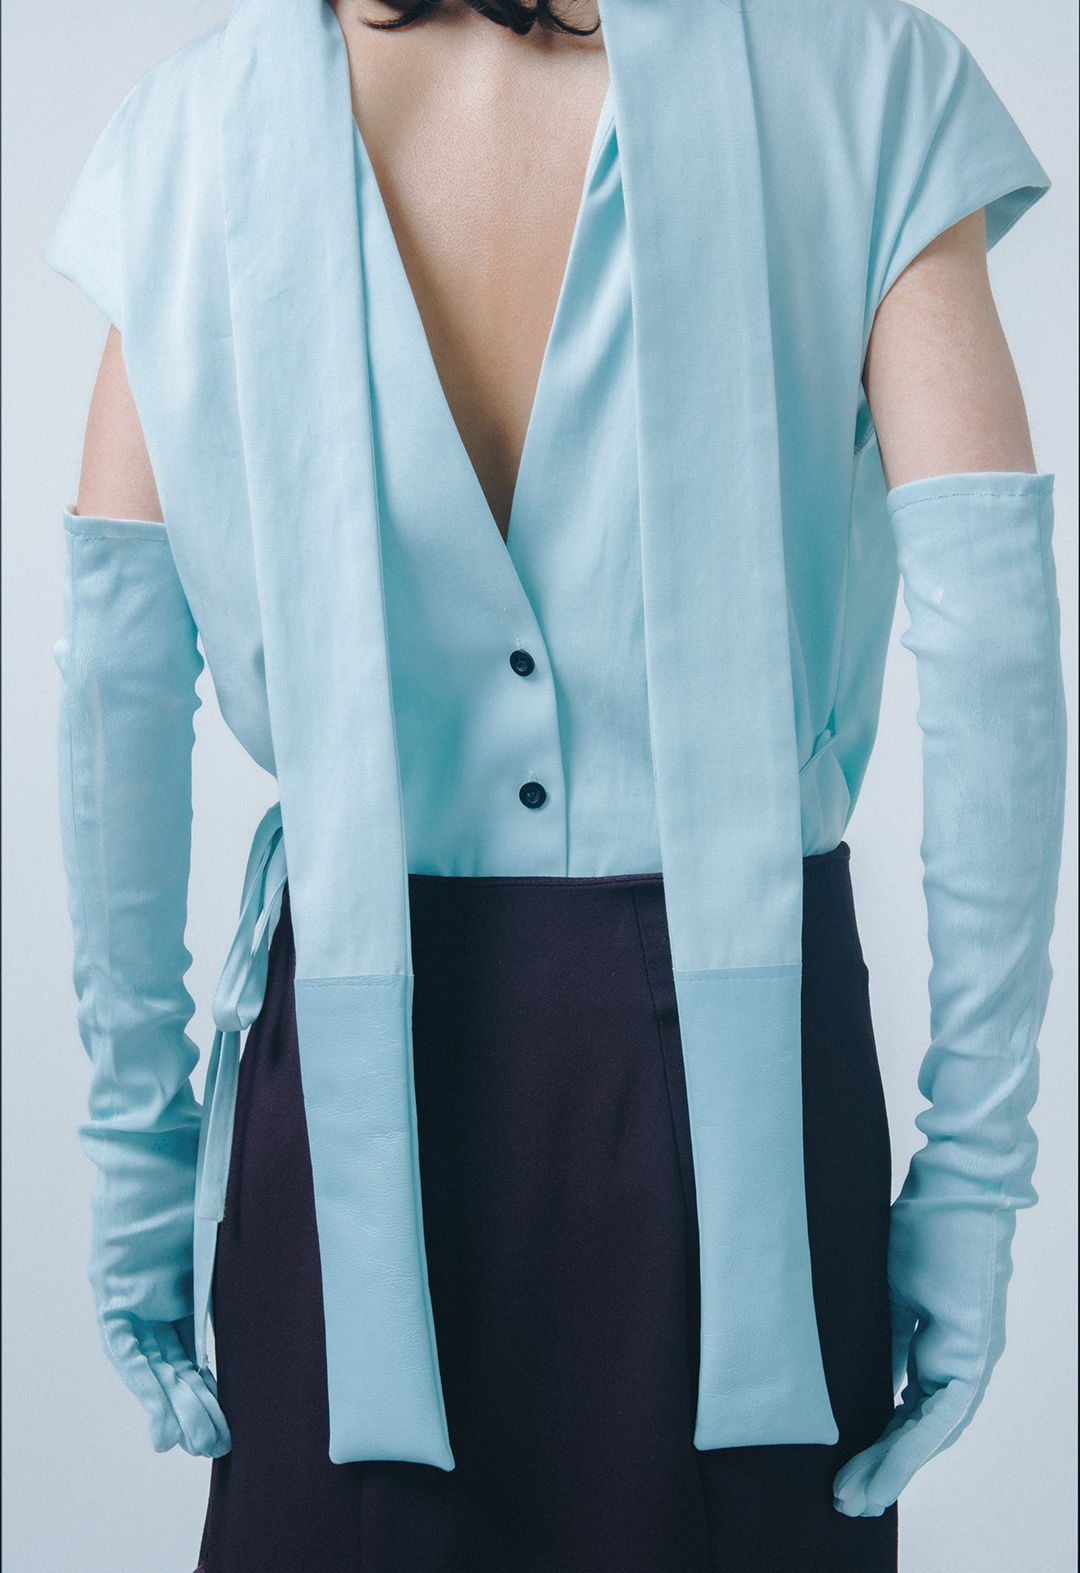 Back view of look 1, showing a baby-blue shirt with overlap collar and back cutout.